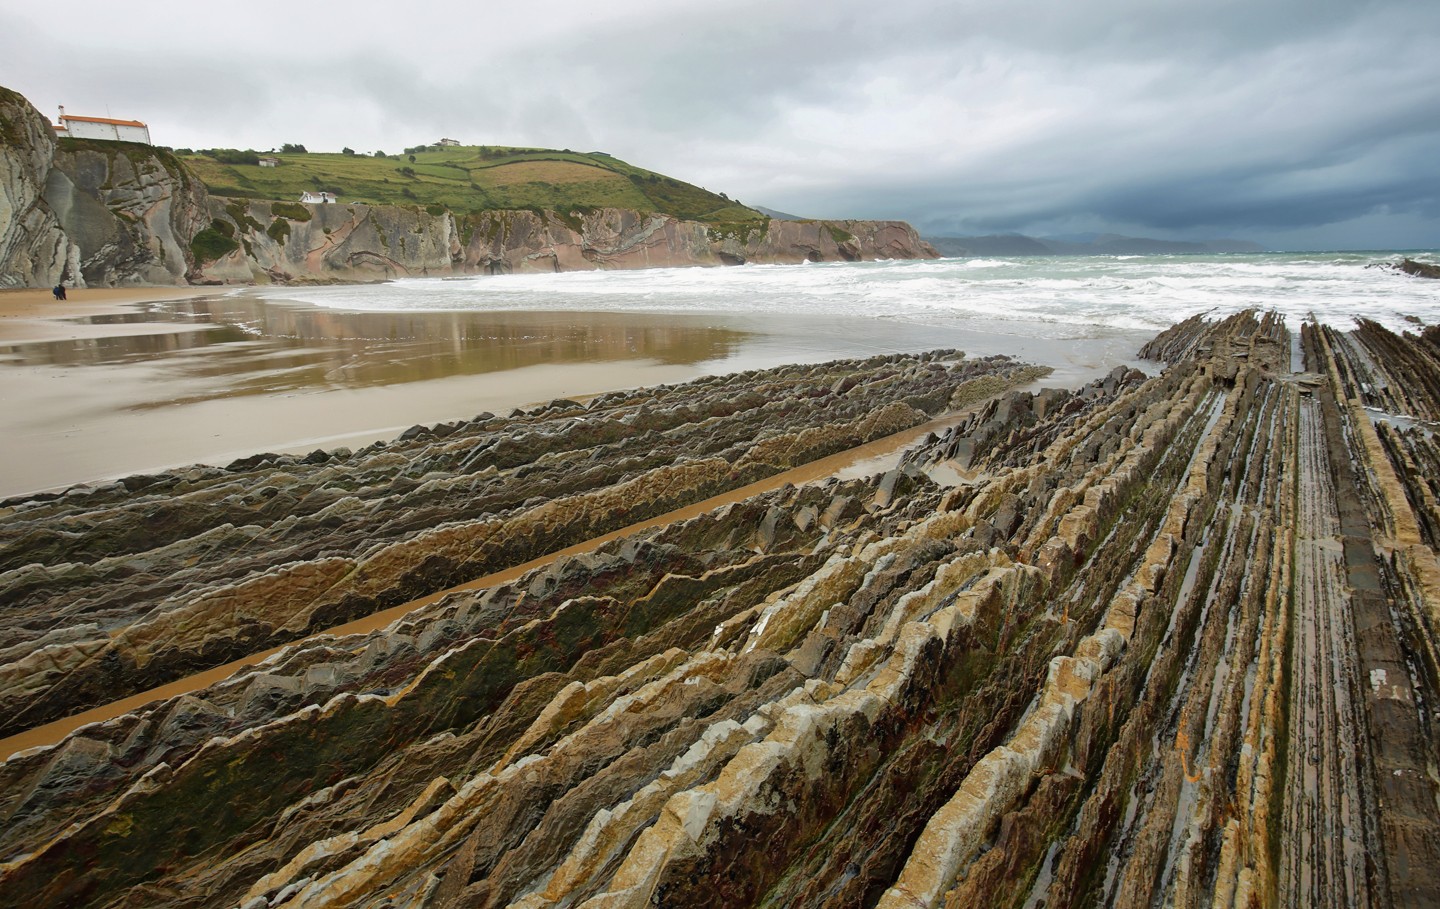 Zumaia geology special coast, the famous Flysch Coast in Northern Spain (Foto: Getty Images)